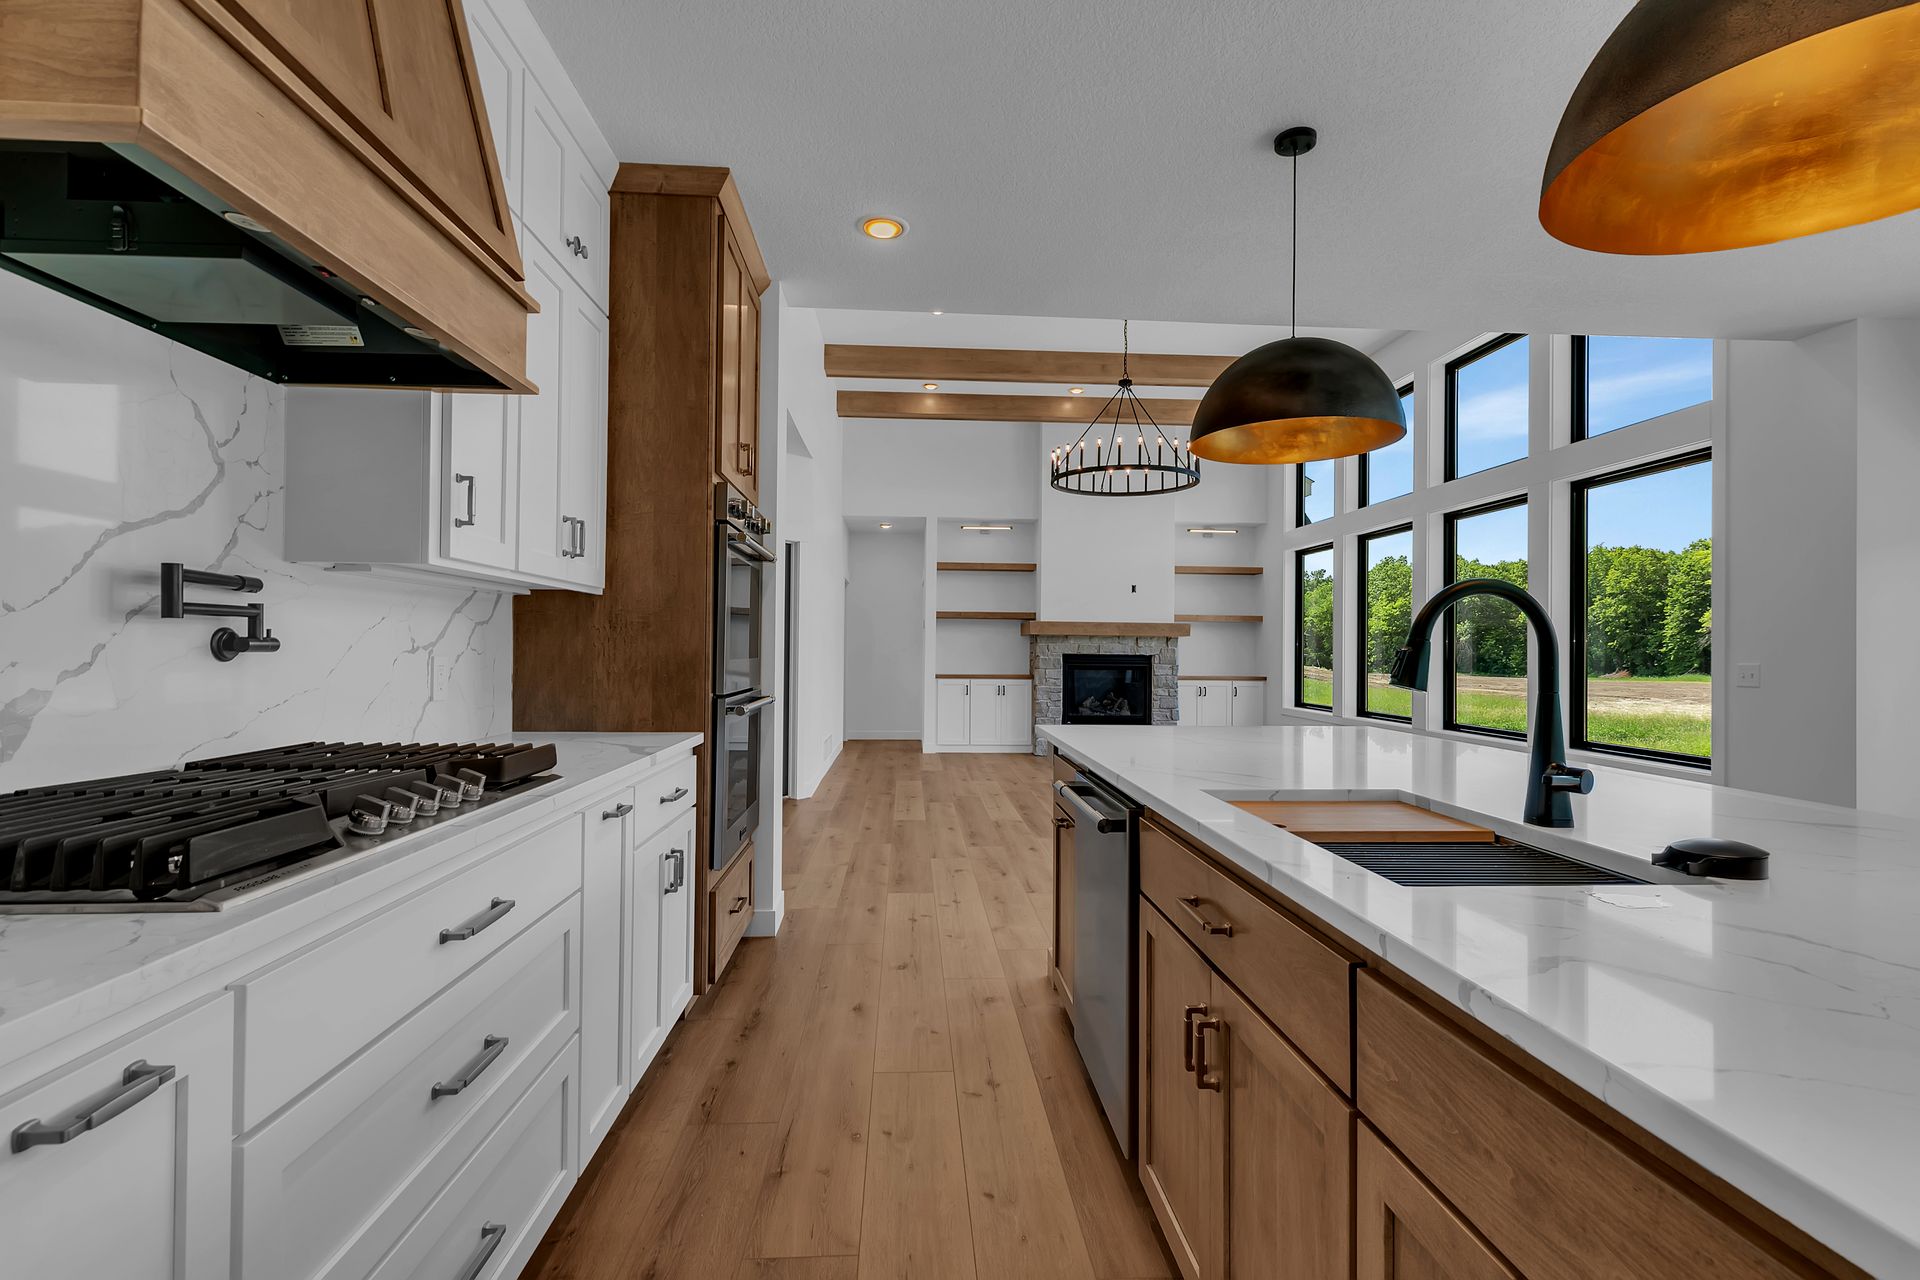 A kitchen with white cabinets and wooden floors and a stove top oven.